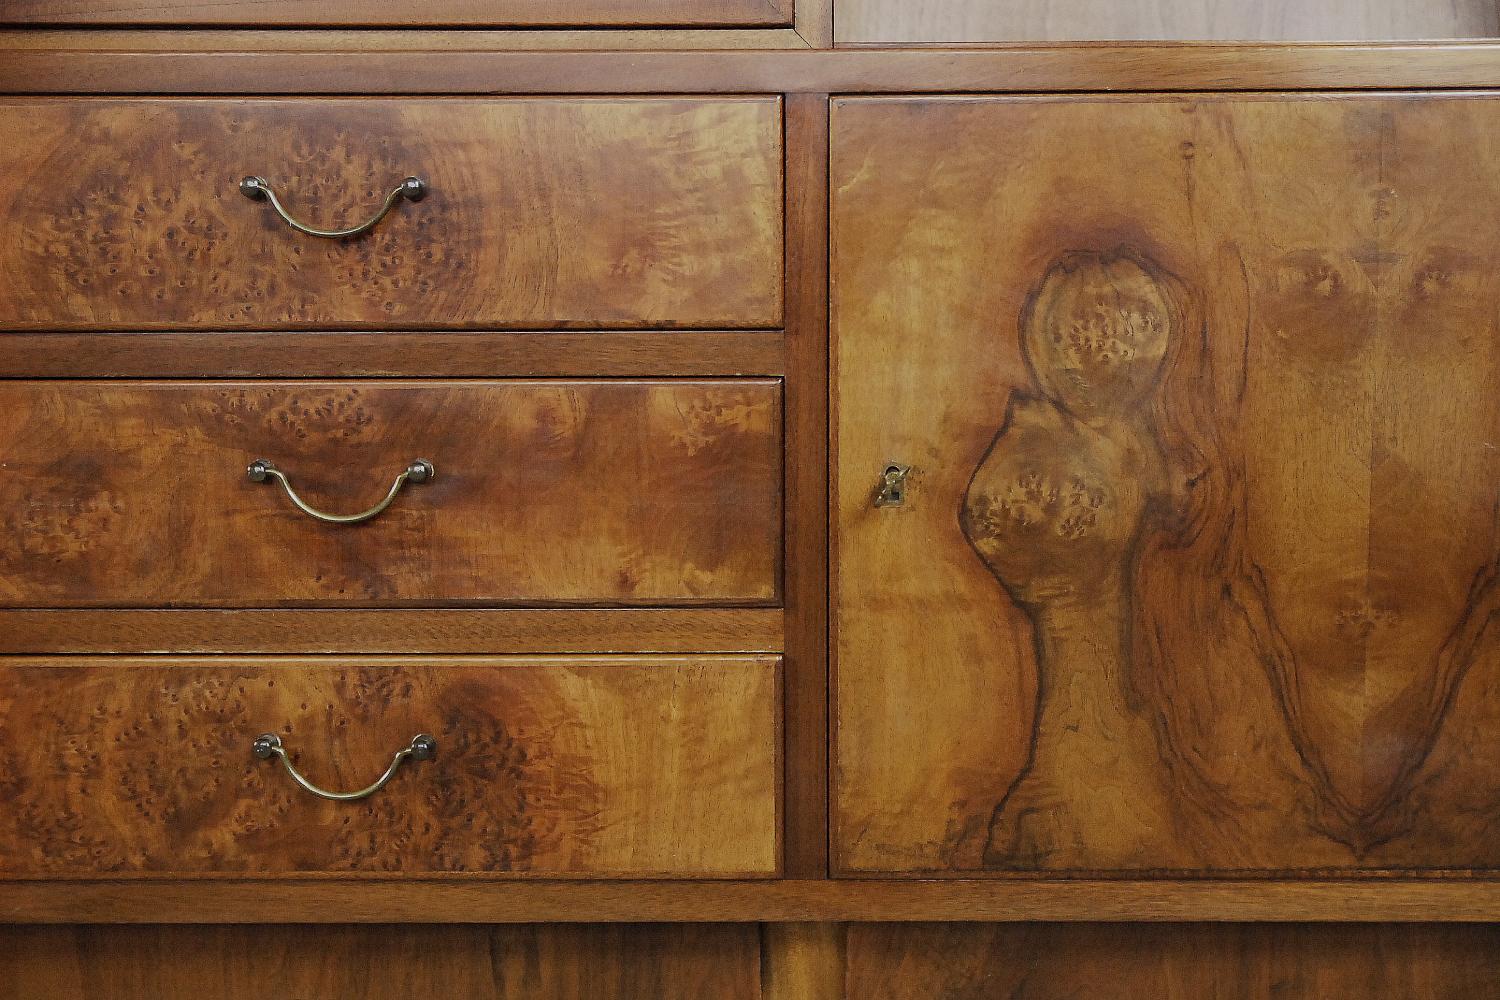 This cupboard was manufactured in Sweden during the 1940s. It is finished in walnut burl wood. A burl (or burr) is a tree growth in which the grain has grown in a deformed manner. It is commonly found in the form of a rounded outgrowth on a tree